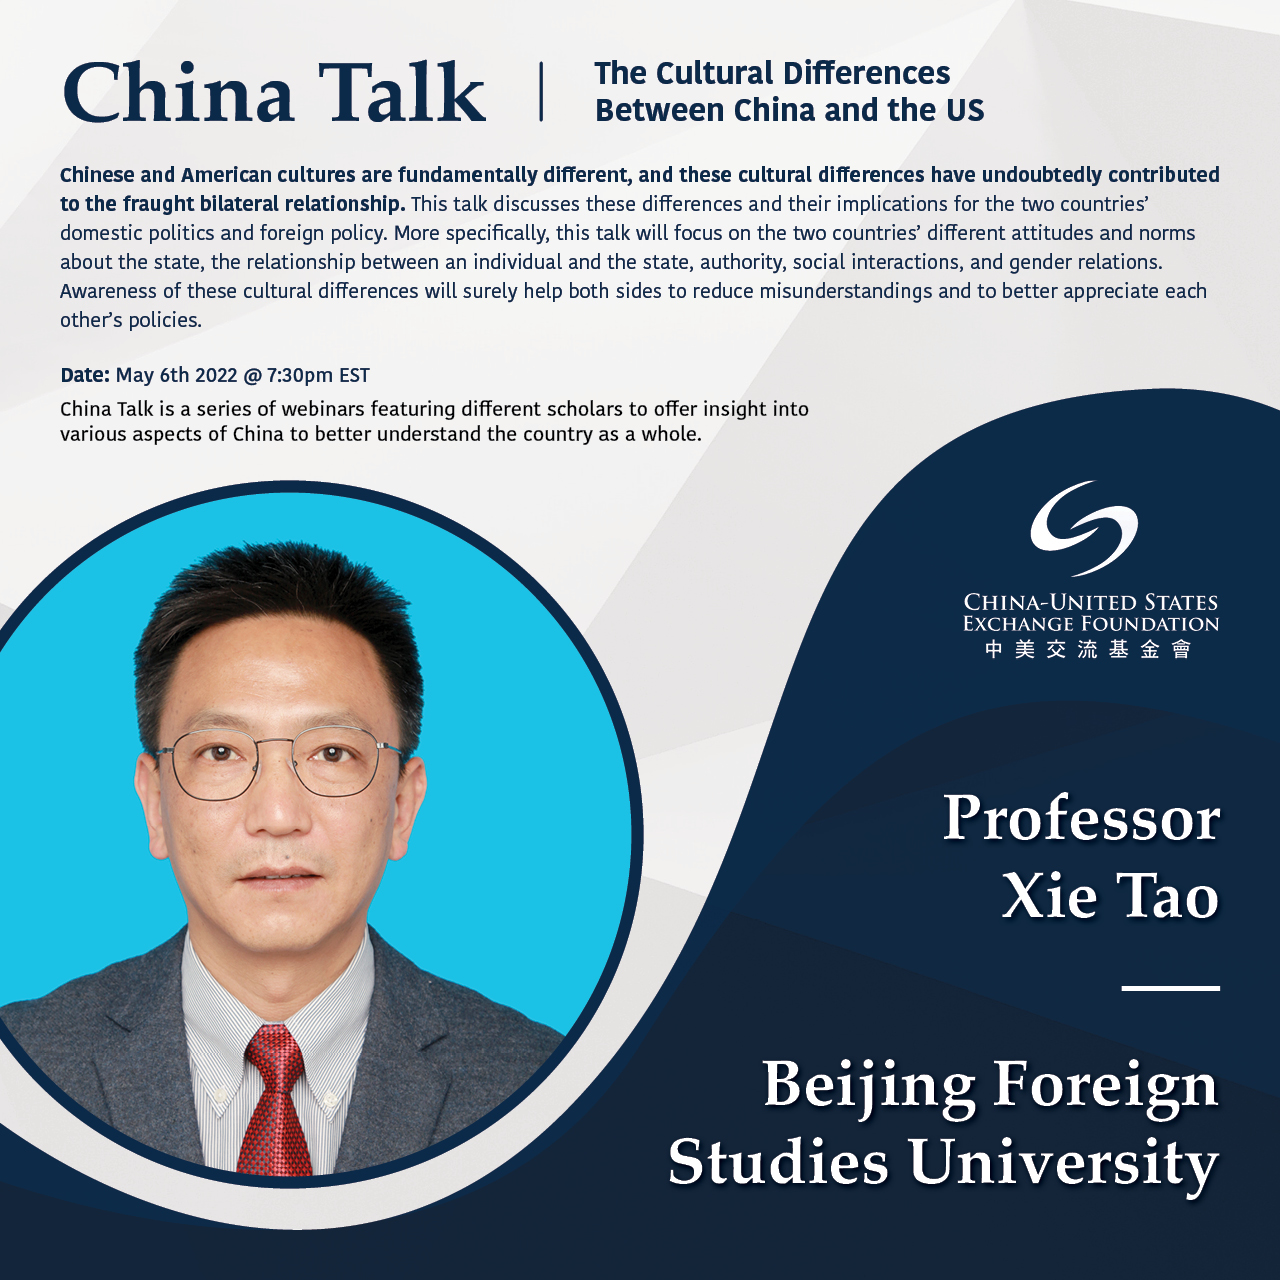 China Talk - The Cultural Differences Between China and the U.S.